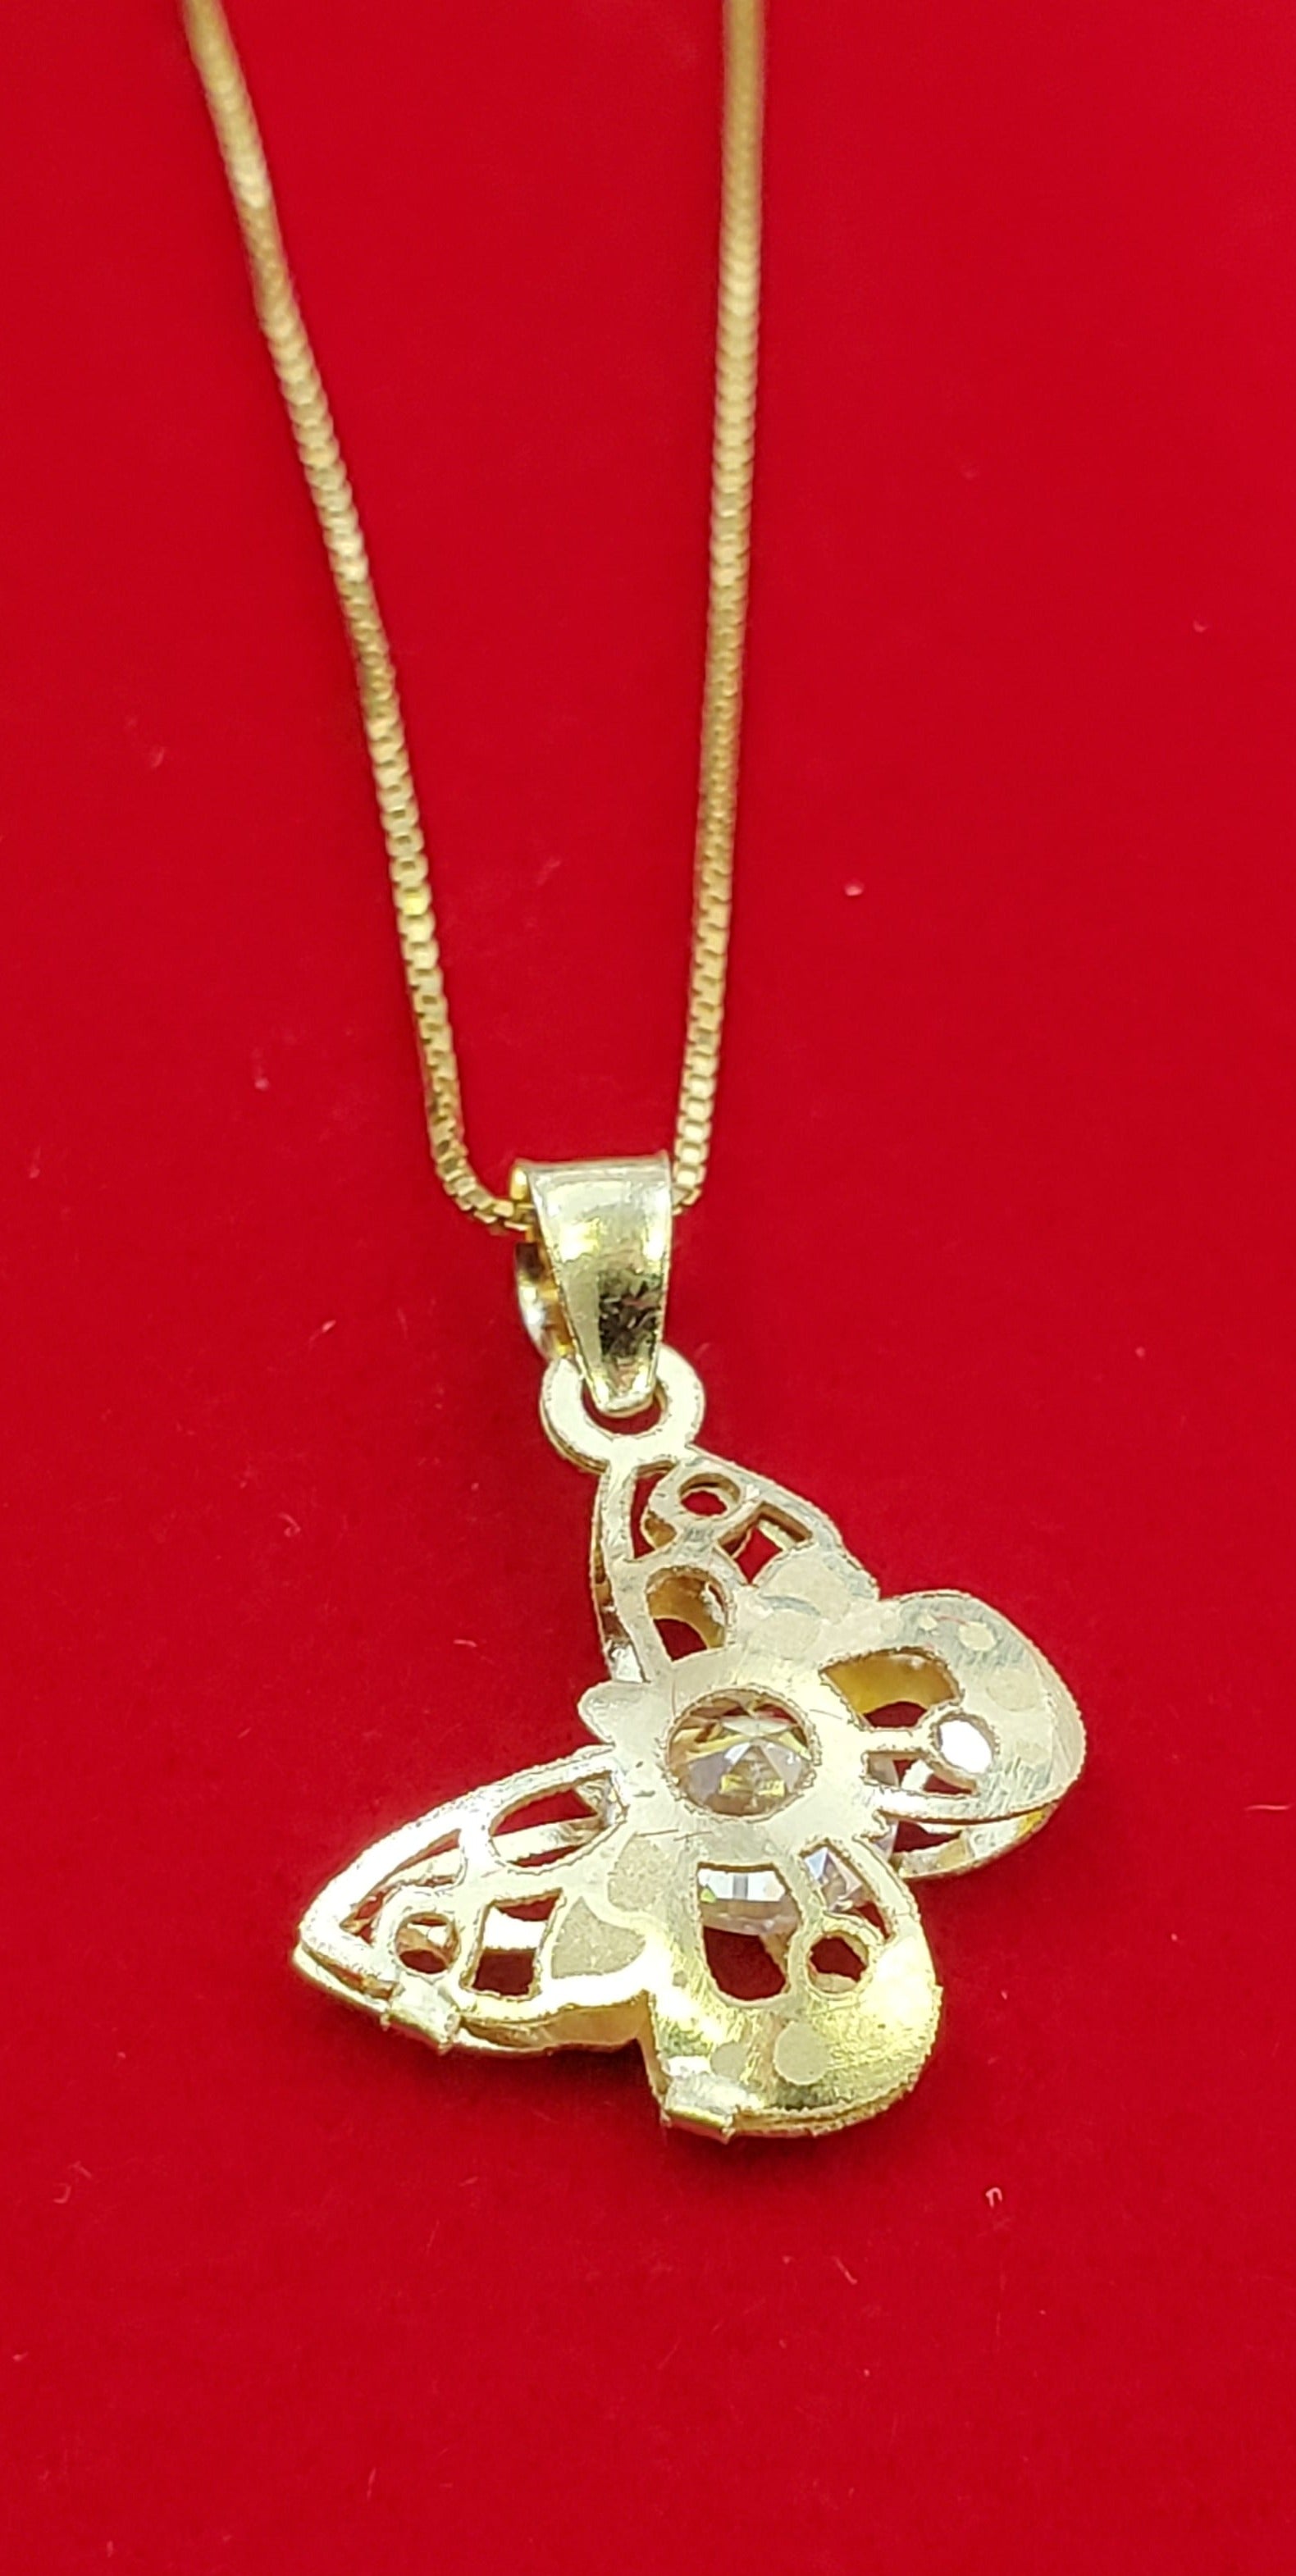 10K Solid Real Yellow Gold Butterfly Cz Inside Pendant Charm with Box Chain